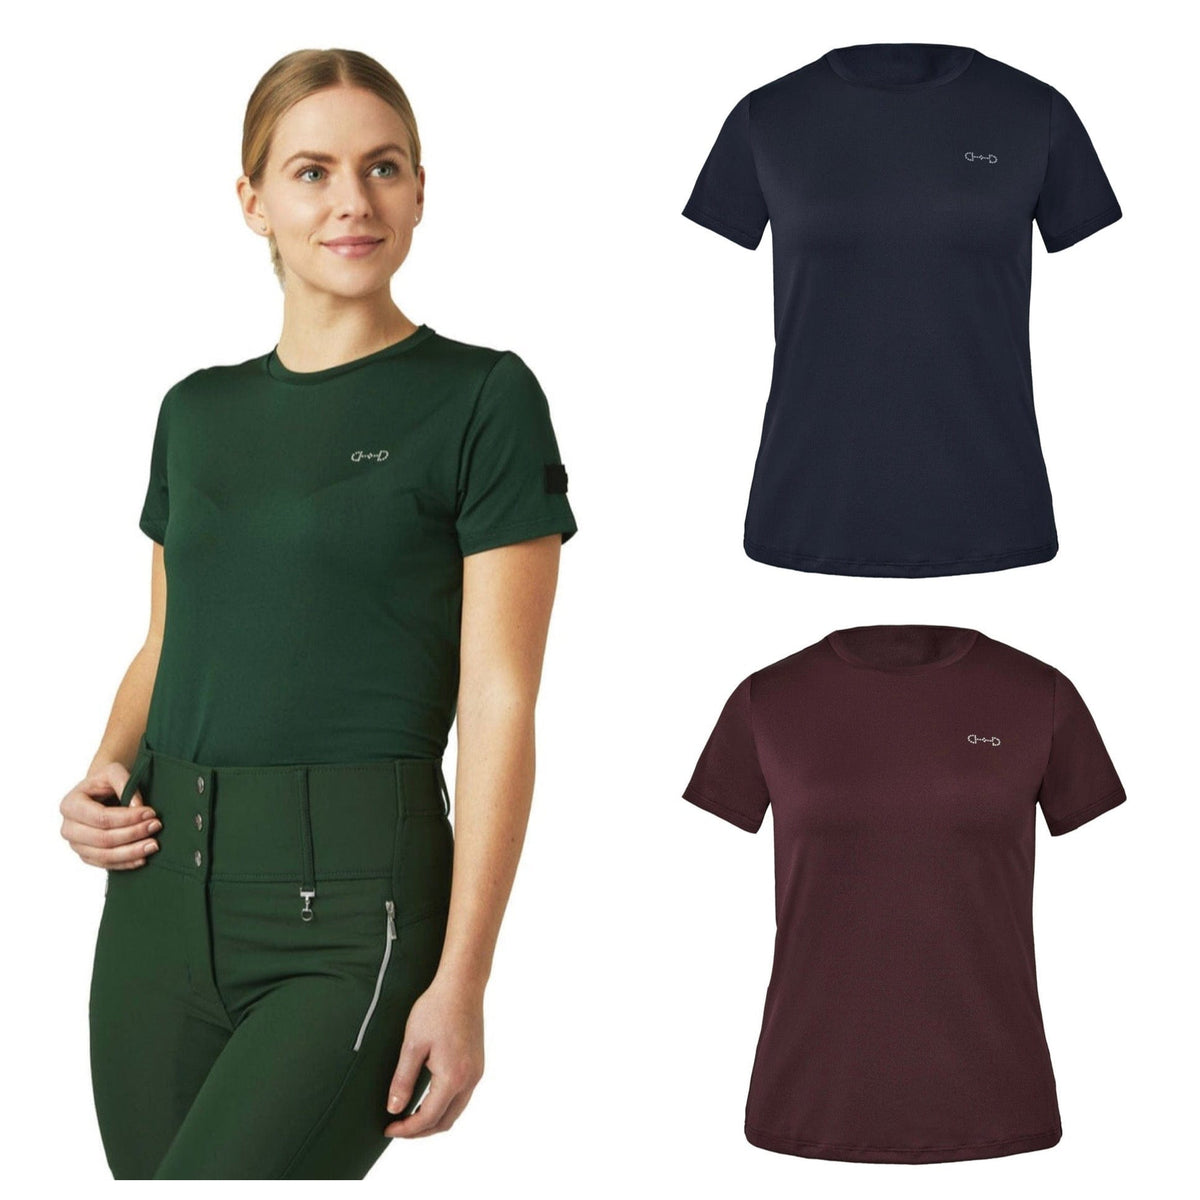 Horze Women's Casual Shirt Horze- Summer Tee Shirt Tabitha equestrian team apparel online tack store mobile tack store custom farm apparel custom show stable clothing equestrian lifestyle horse show clothing riding clothes horses equestrian tack store